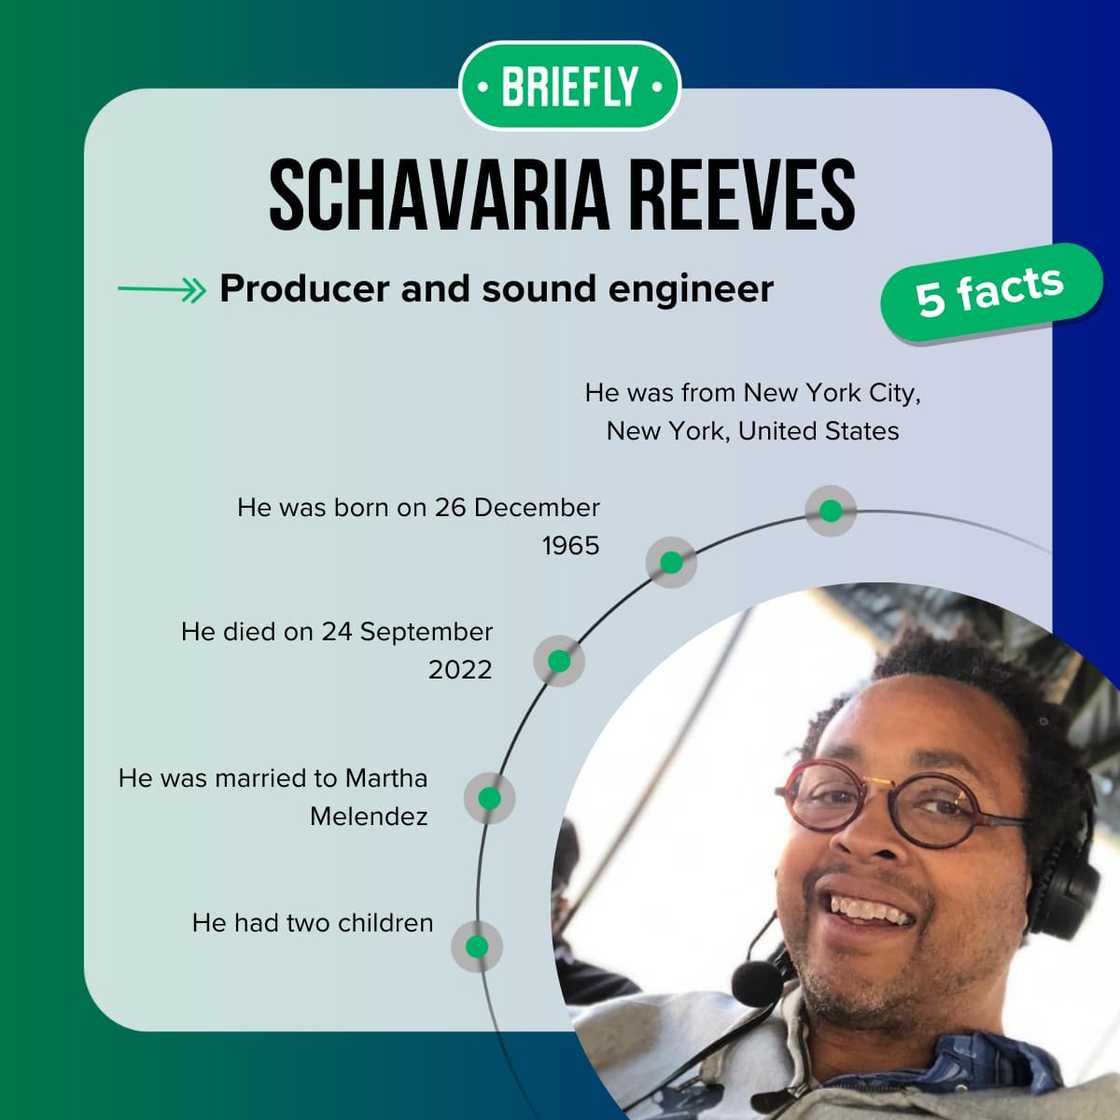 Top 5 facts about Schavaria Reeves